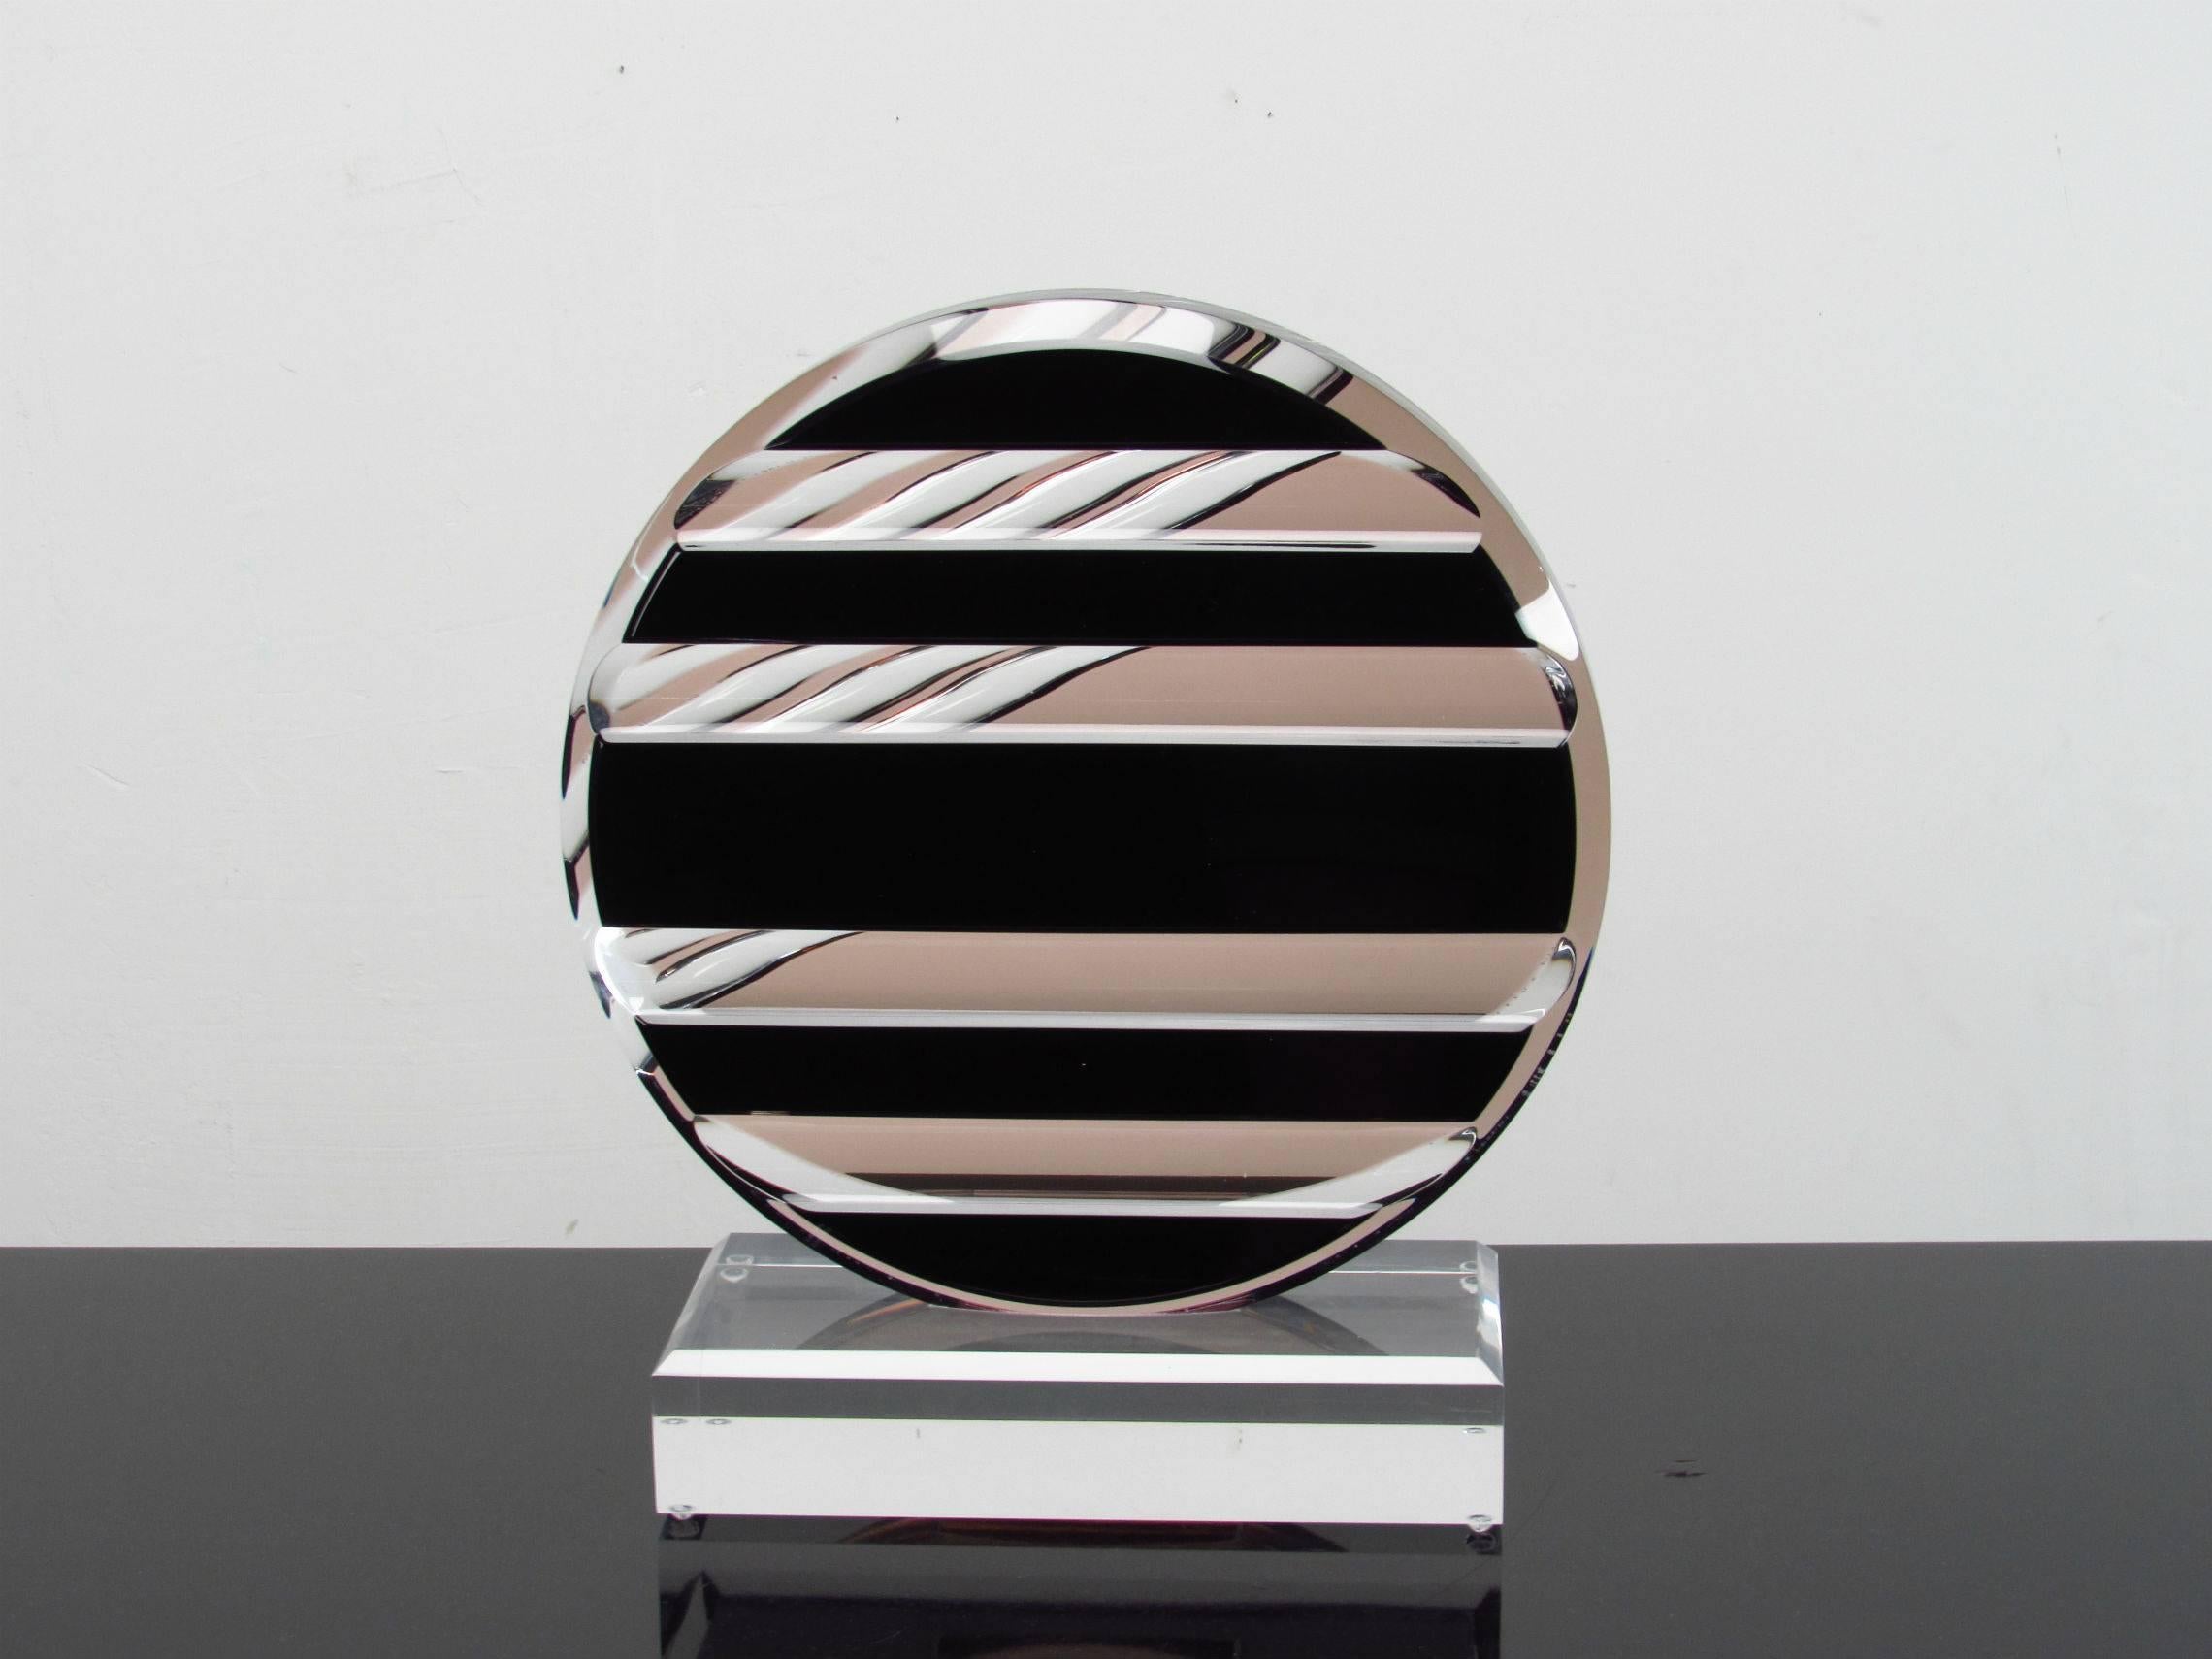 Lucite 1980s Abstract Modern Disc Sculpture In Good Condition For Sale In Surprise, AZ